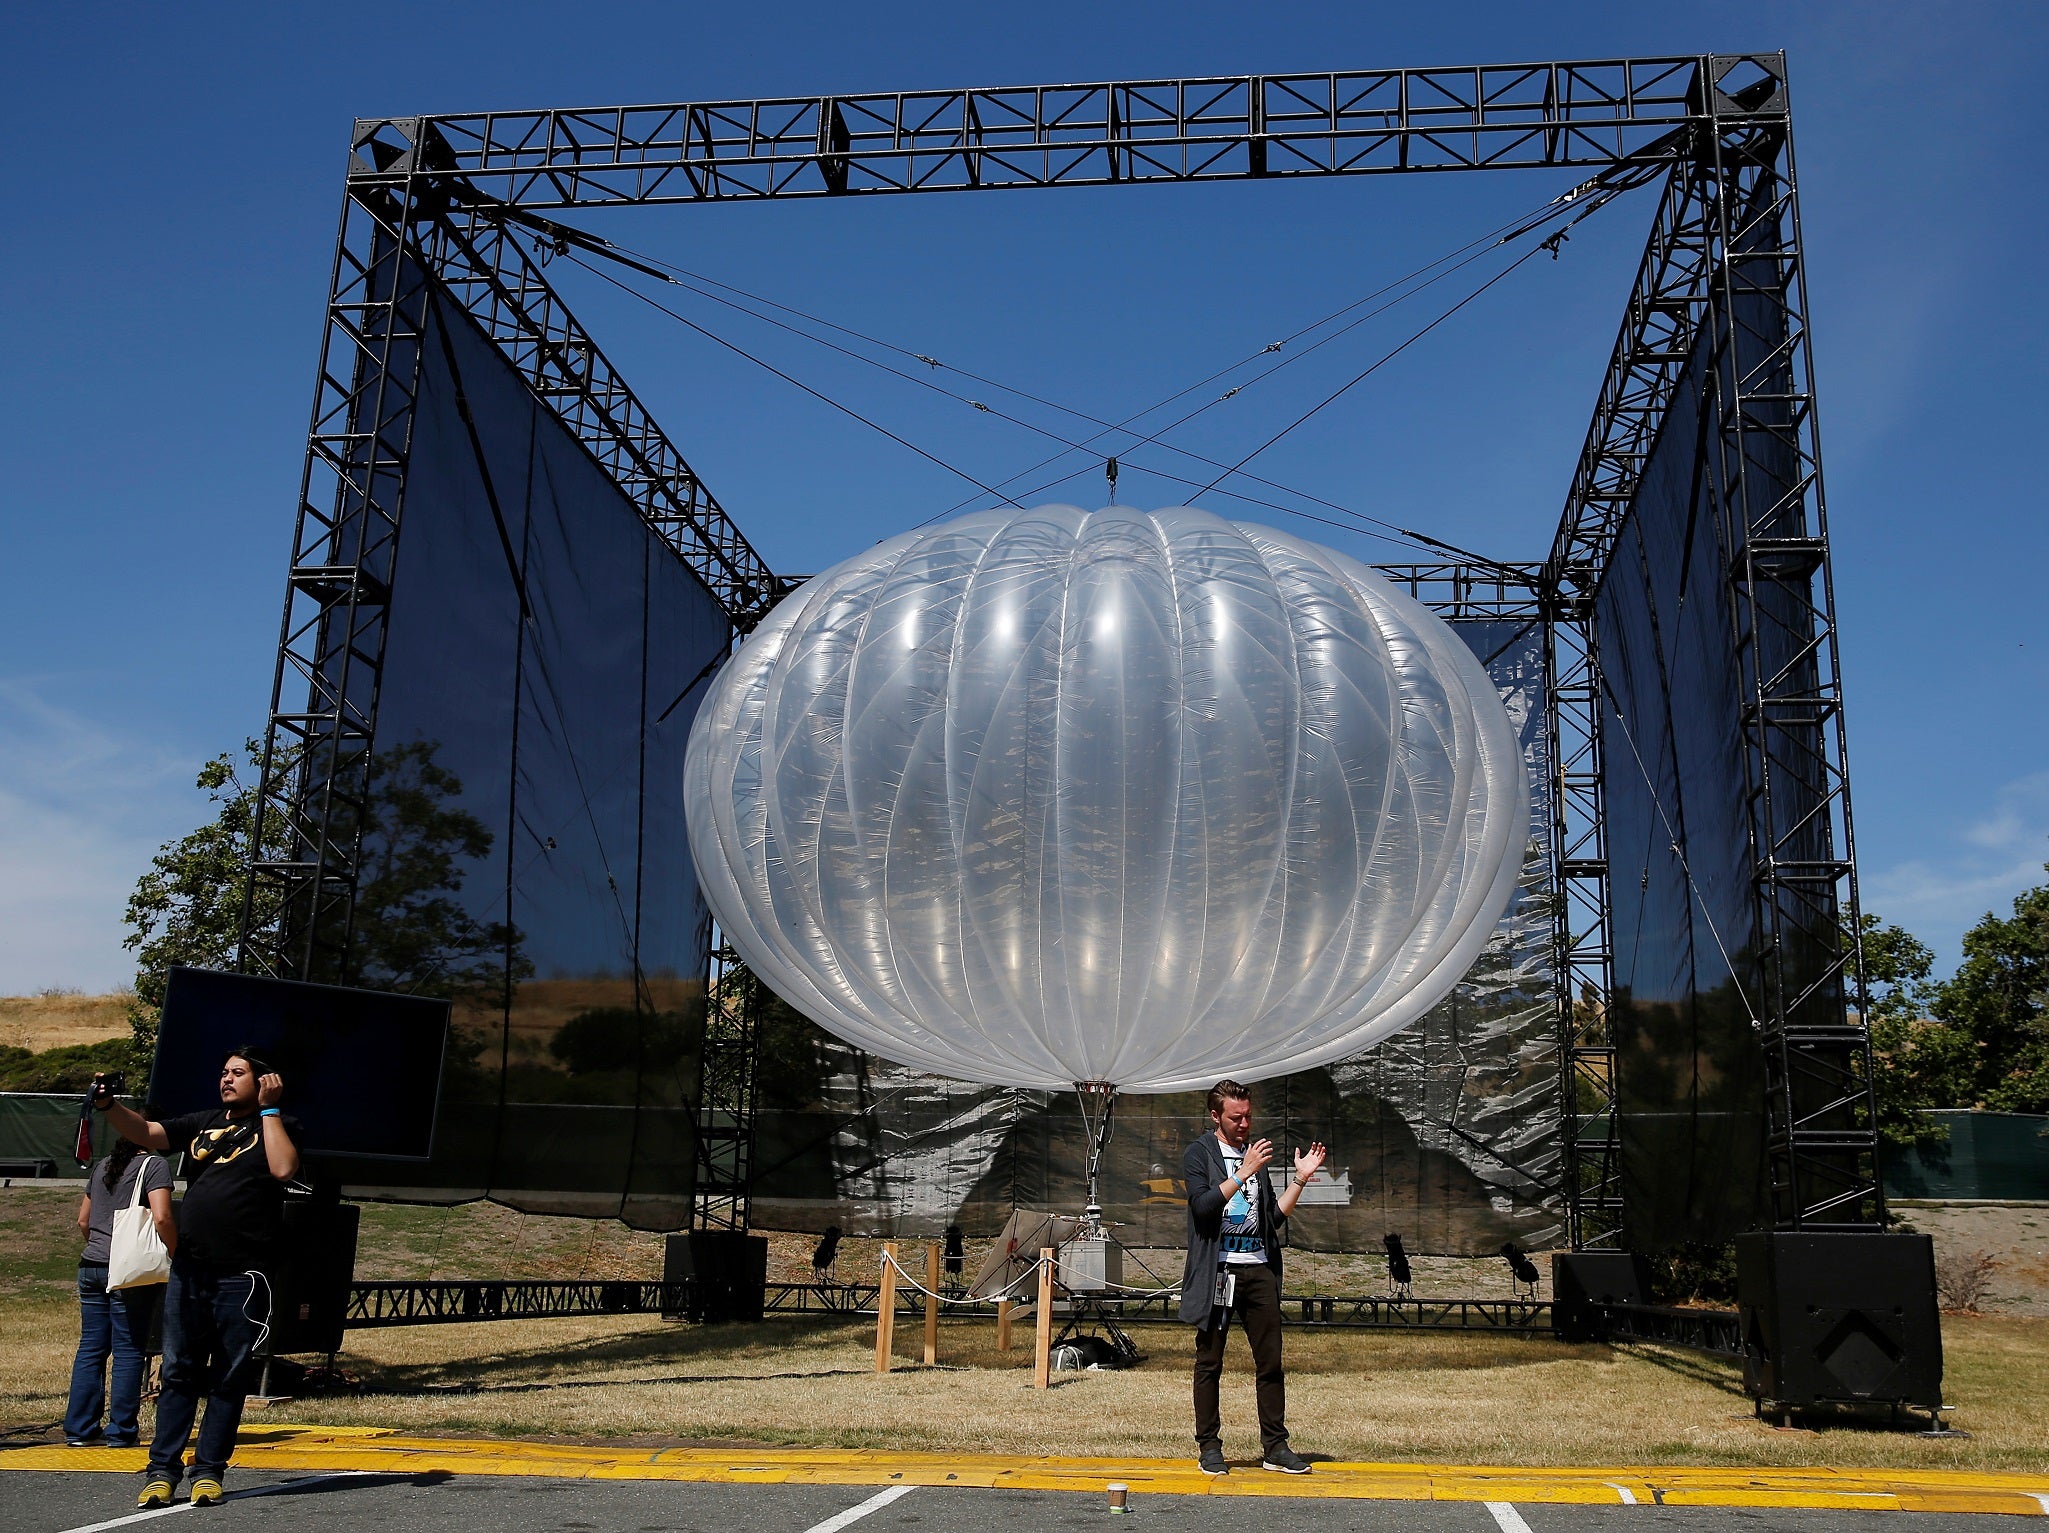 A Google Project Loon internet balloon is seen at the Google I/O 2016 developers conference in Mountain View